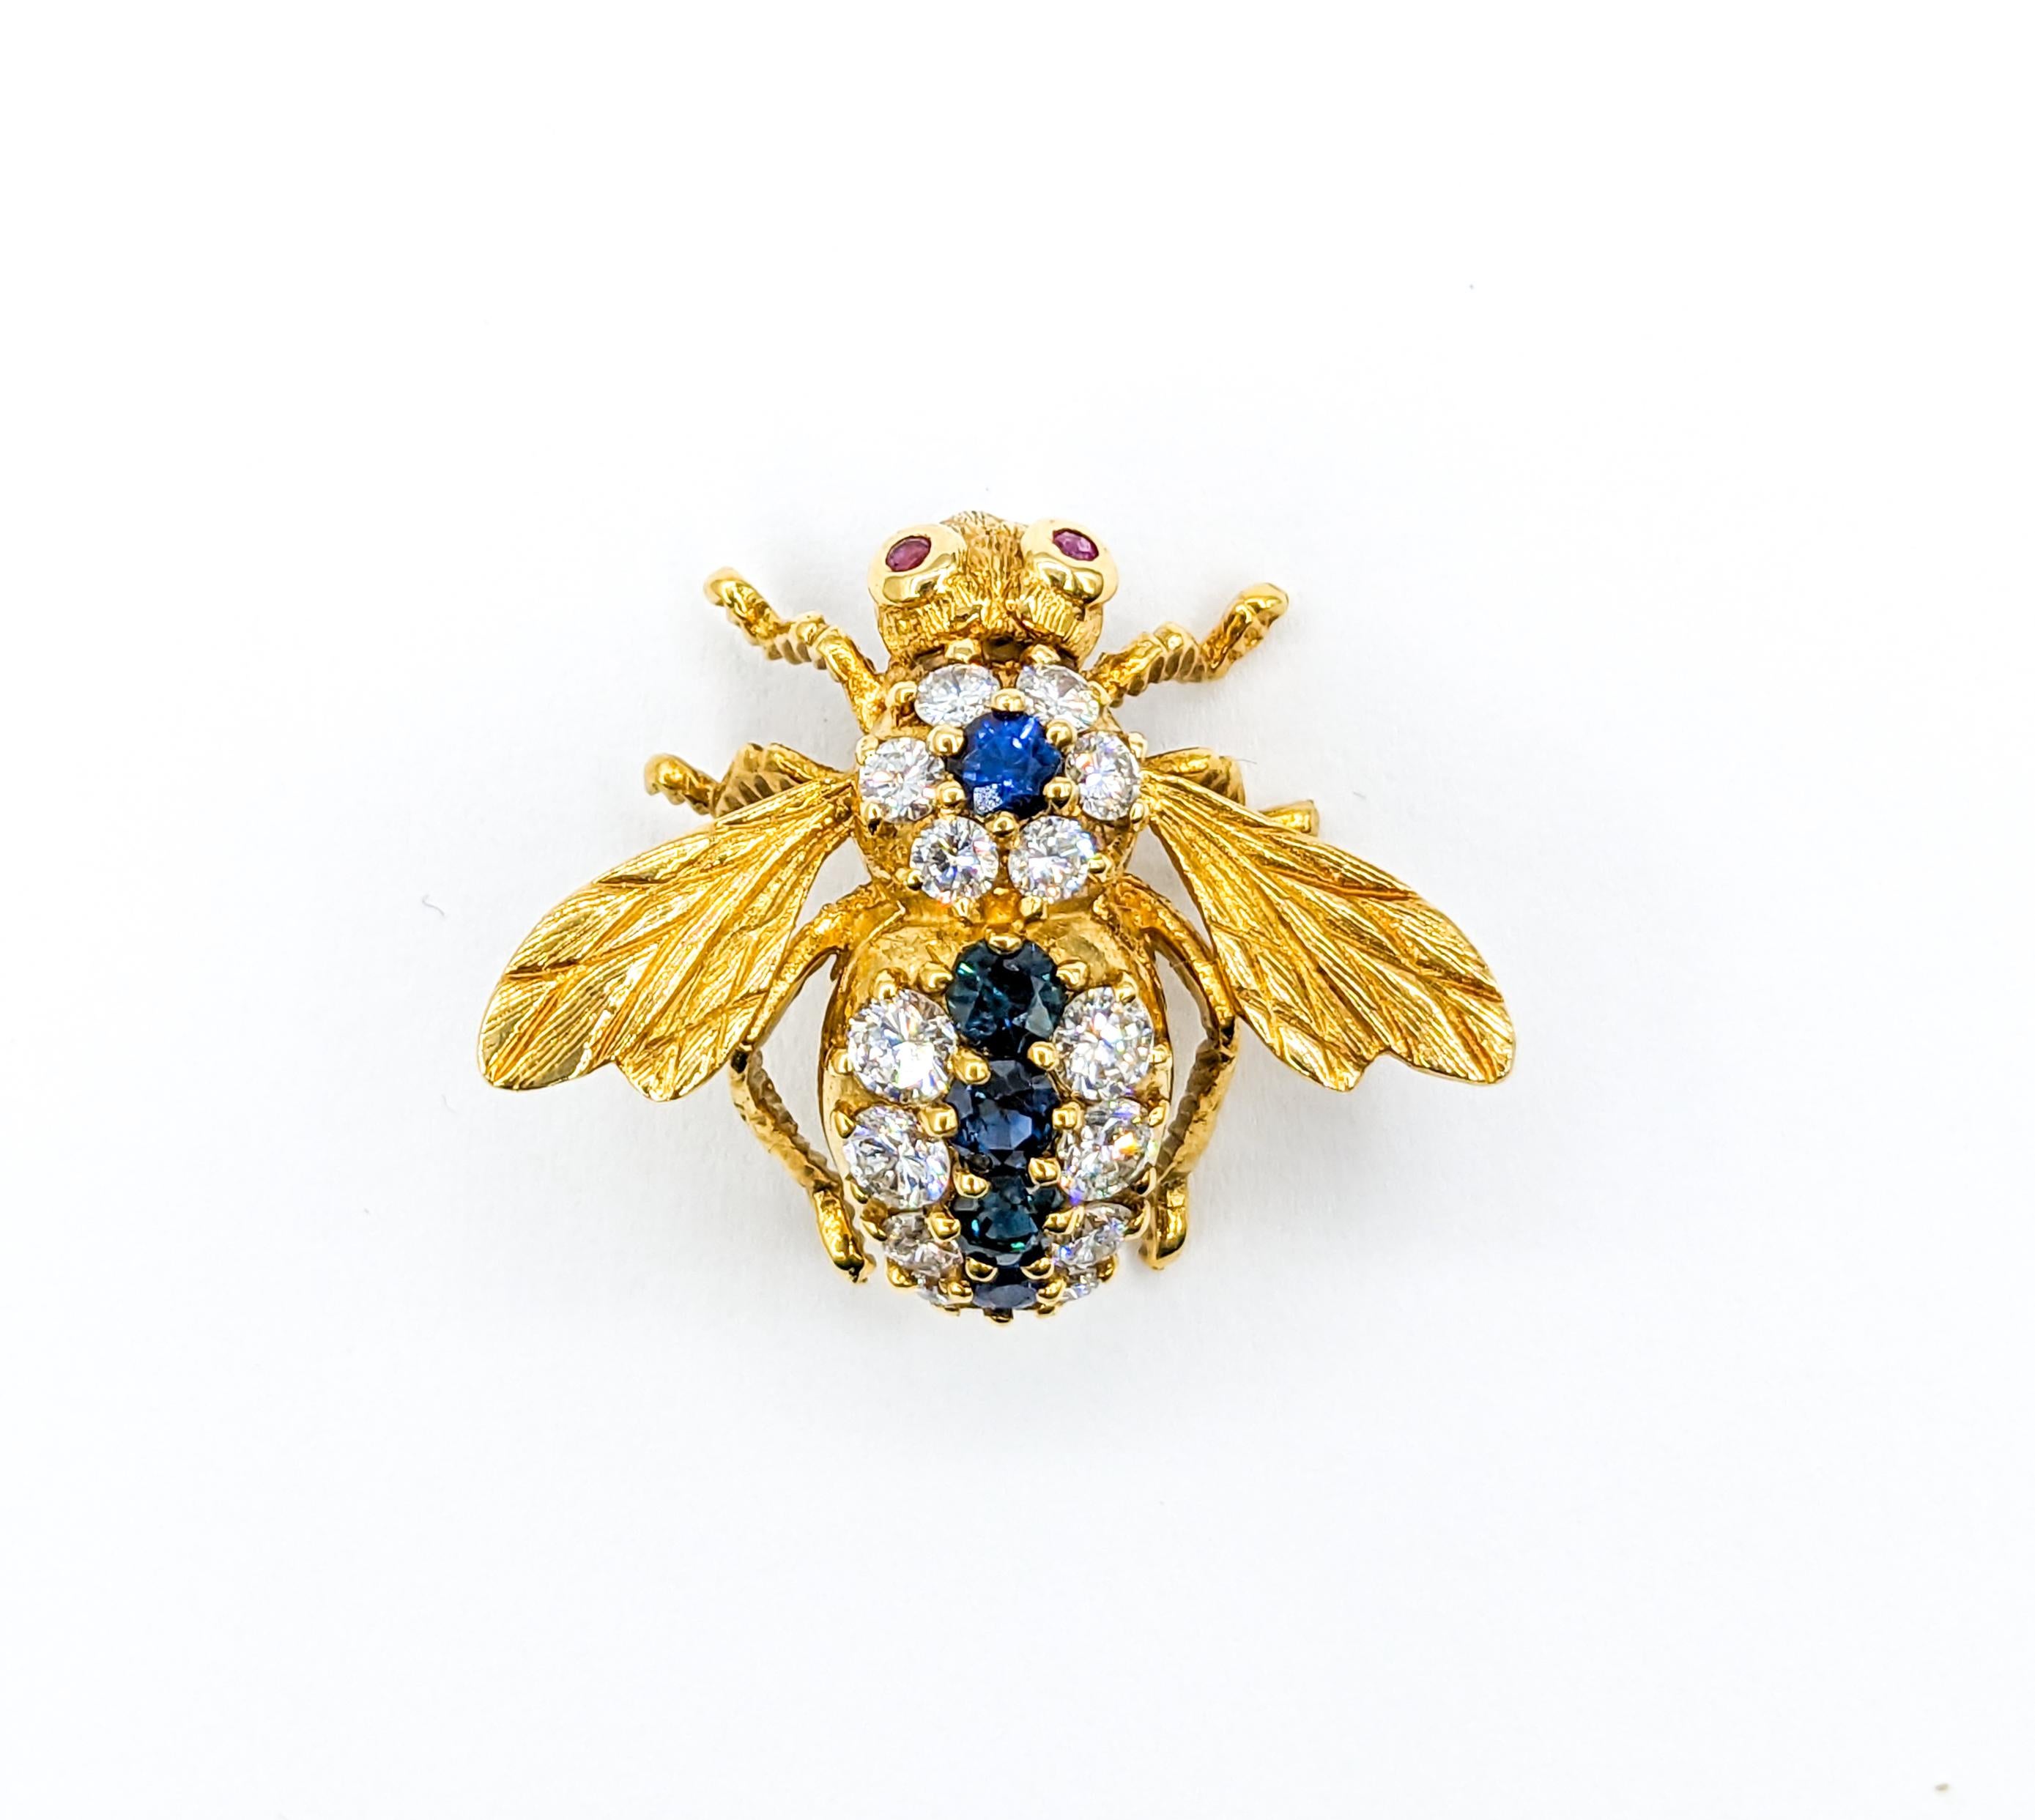 Extraordinary Herbert Rosenthal Bee Sapphire & Diamond Pin Brooch in 18K Yellow gold

Indulge in the artistry of Herbert Rosenthal with this stunning vintage Bee brooch, meticulously shaped in 18k yellow gold. Its brilliance is accentuated by